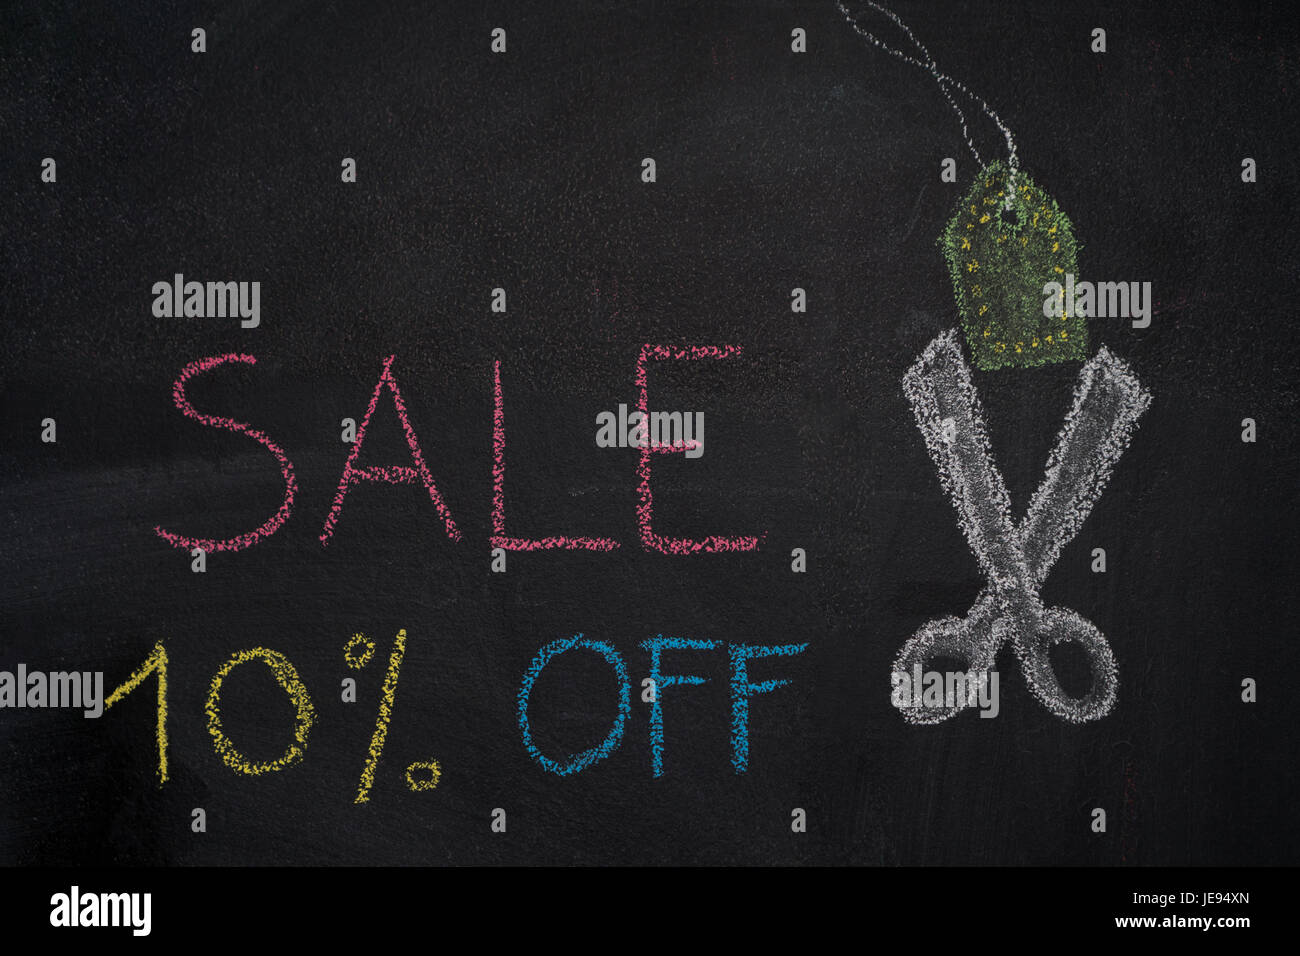 Sale 10% off. Sale and discount price sign with scissors cutting price tag drawn with chalk on blackboard Stock Photo